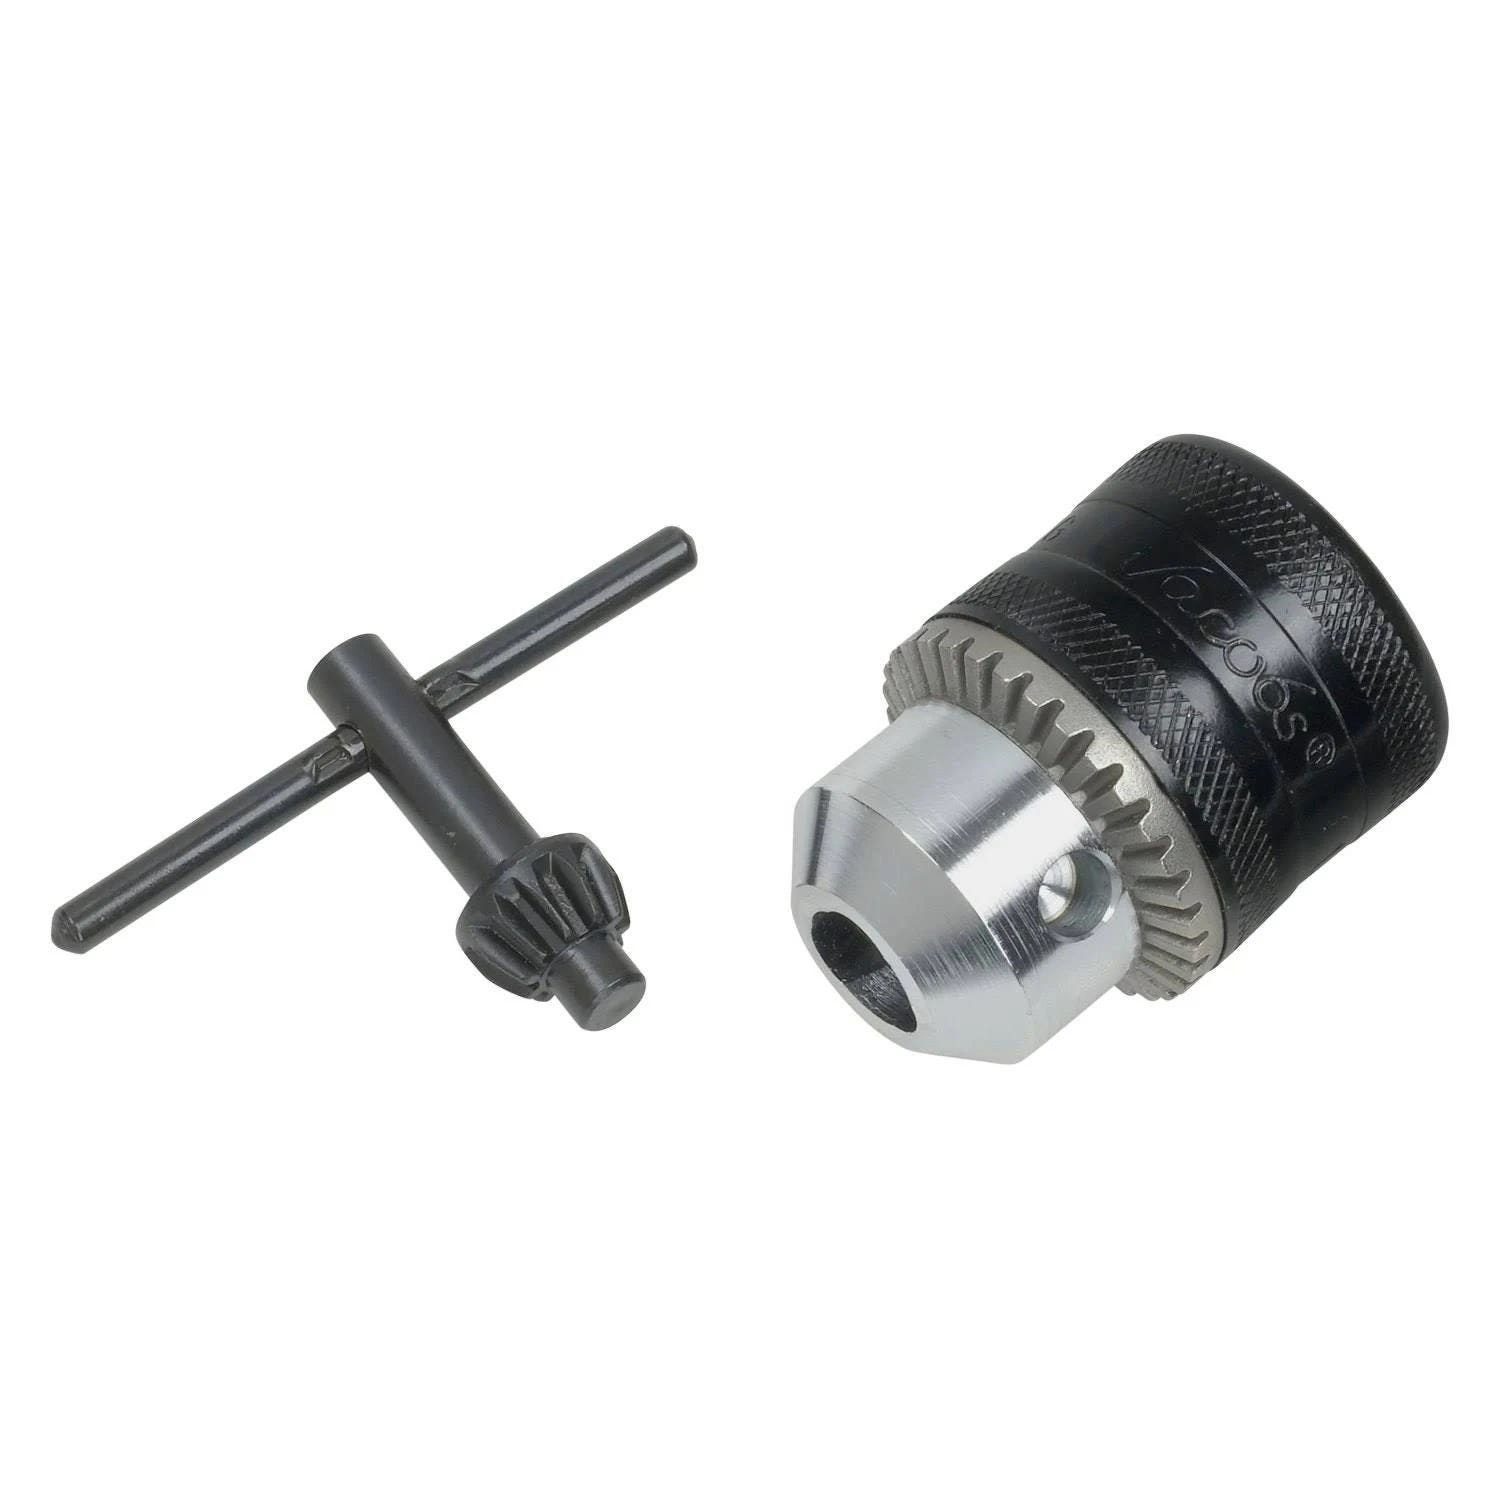 Jacobs 1/2 in. Multi-Craft Chuck: High-Quality Drill Chuck for Versatile Crafting Needs | Image